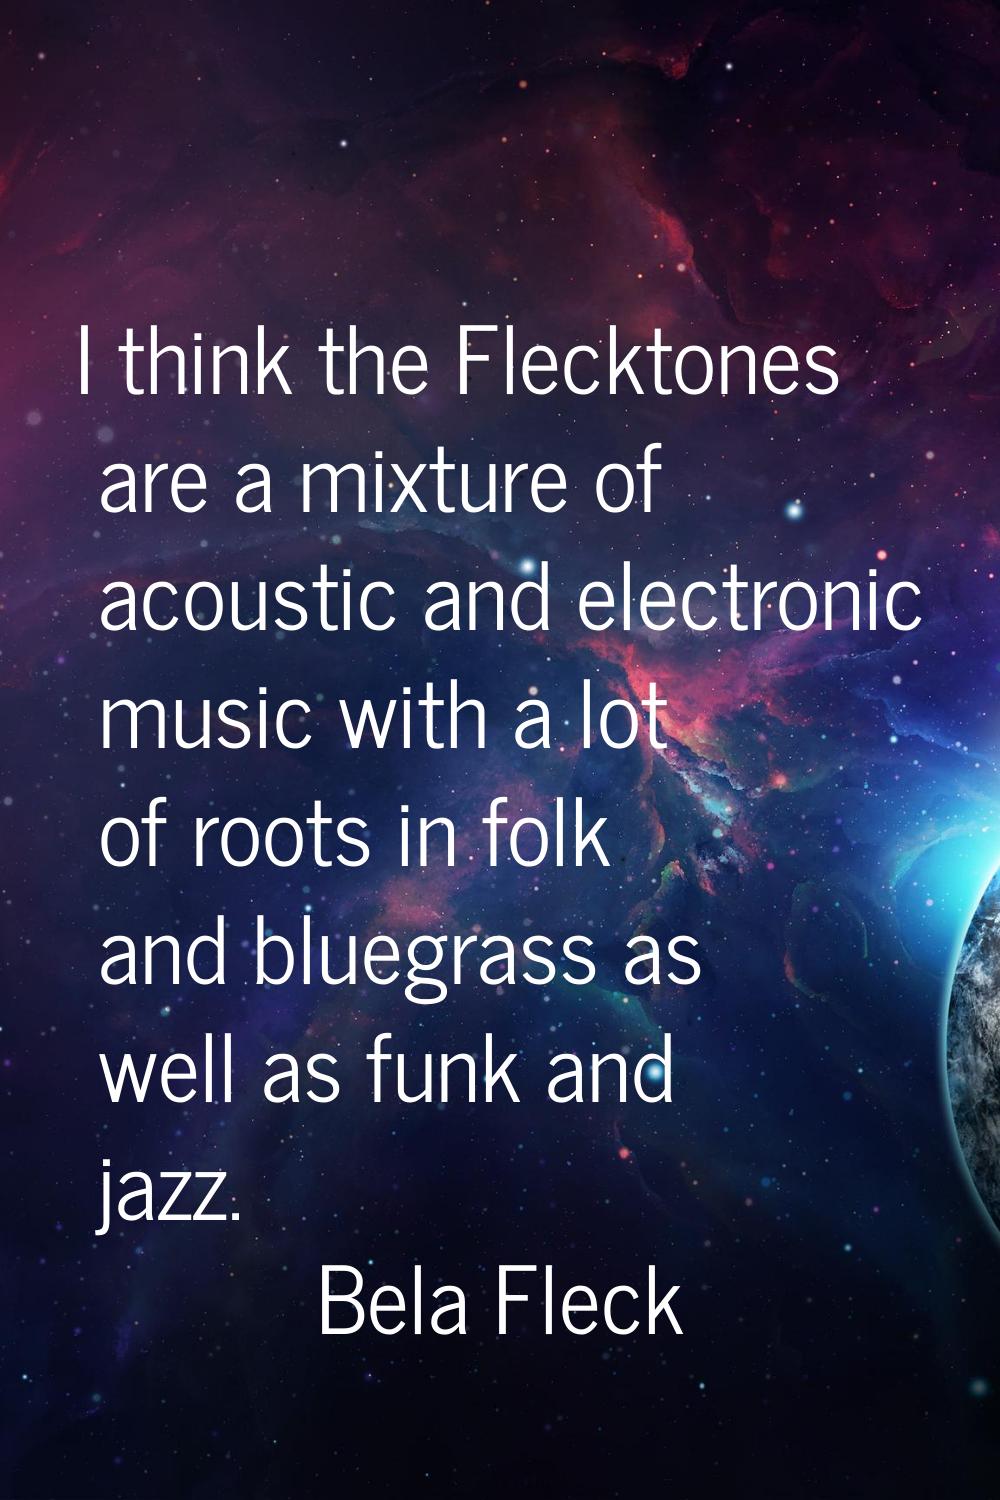 I think the Flecktones are a mixture of acoustic and electronic music with a lot of roots in folk a